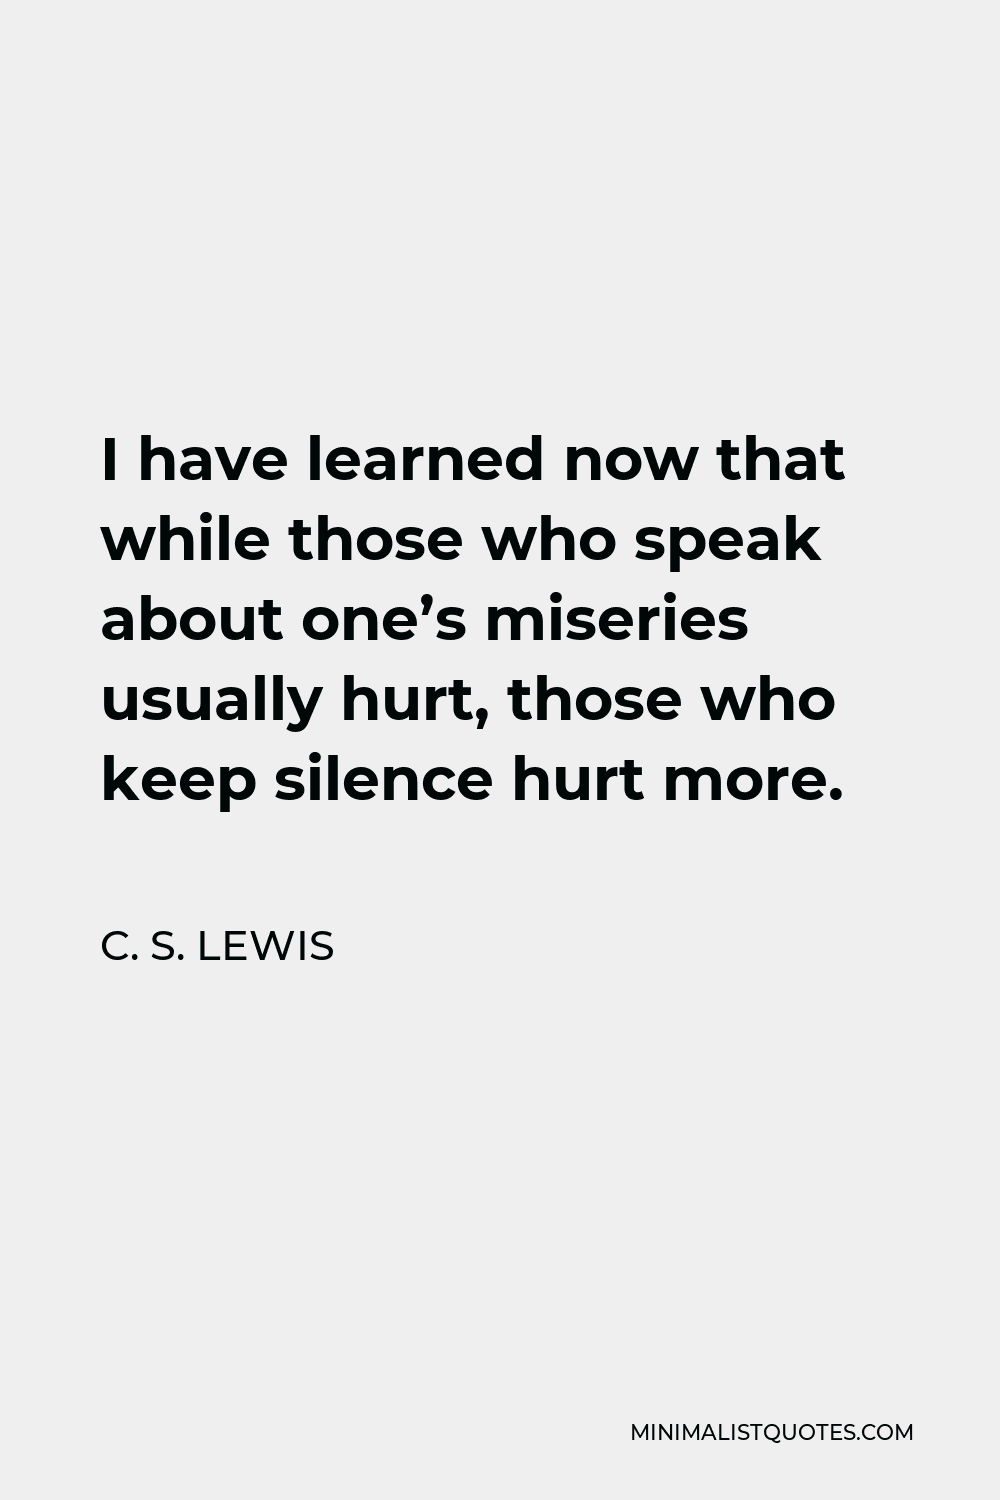 C. S. Lewis Quote - I have learned now that while those who speak about one’s miseries usually hurt, those who keep silence hurt more.